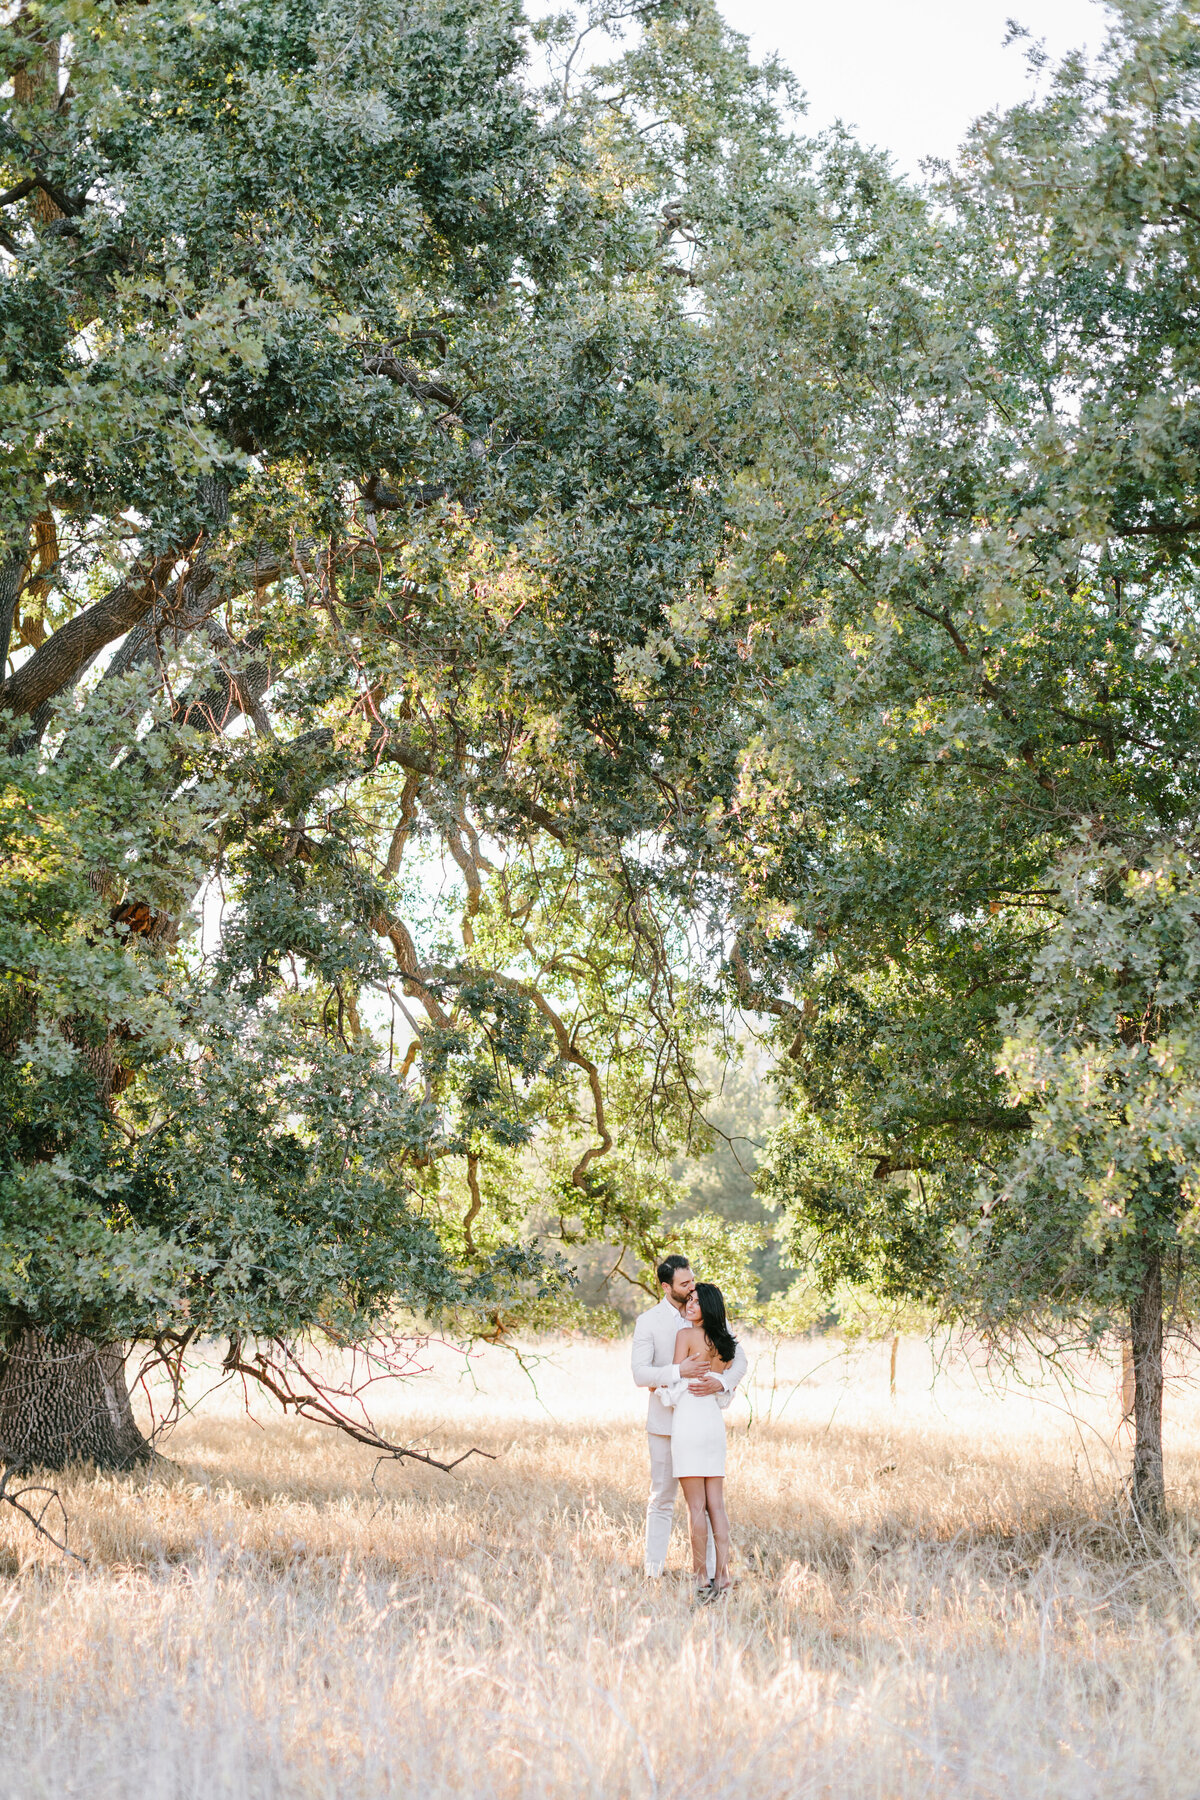 Best California and Texas Engagement Photographer-Jodee Debes Photography-96